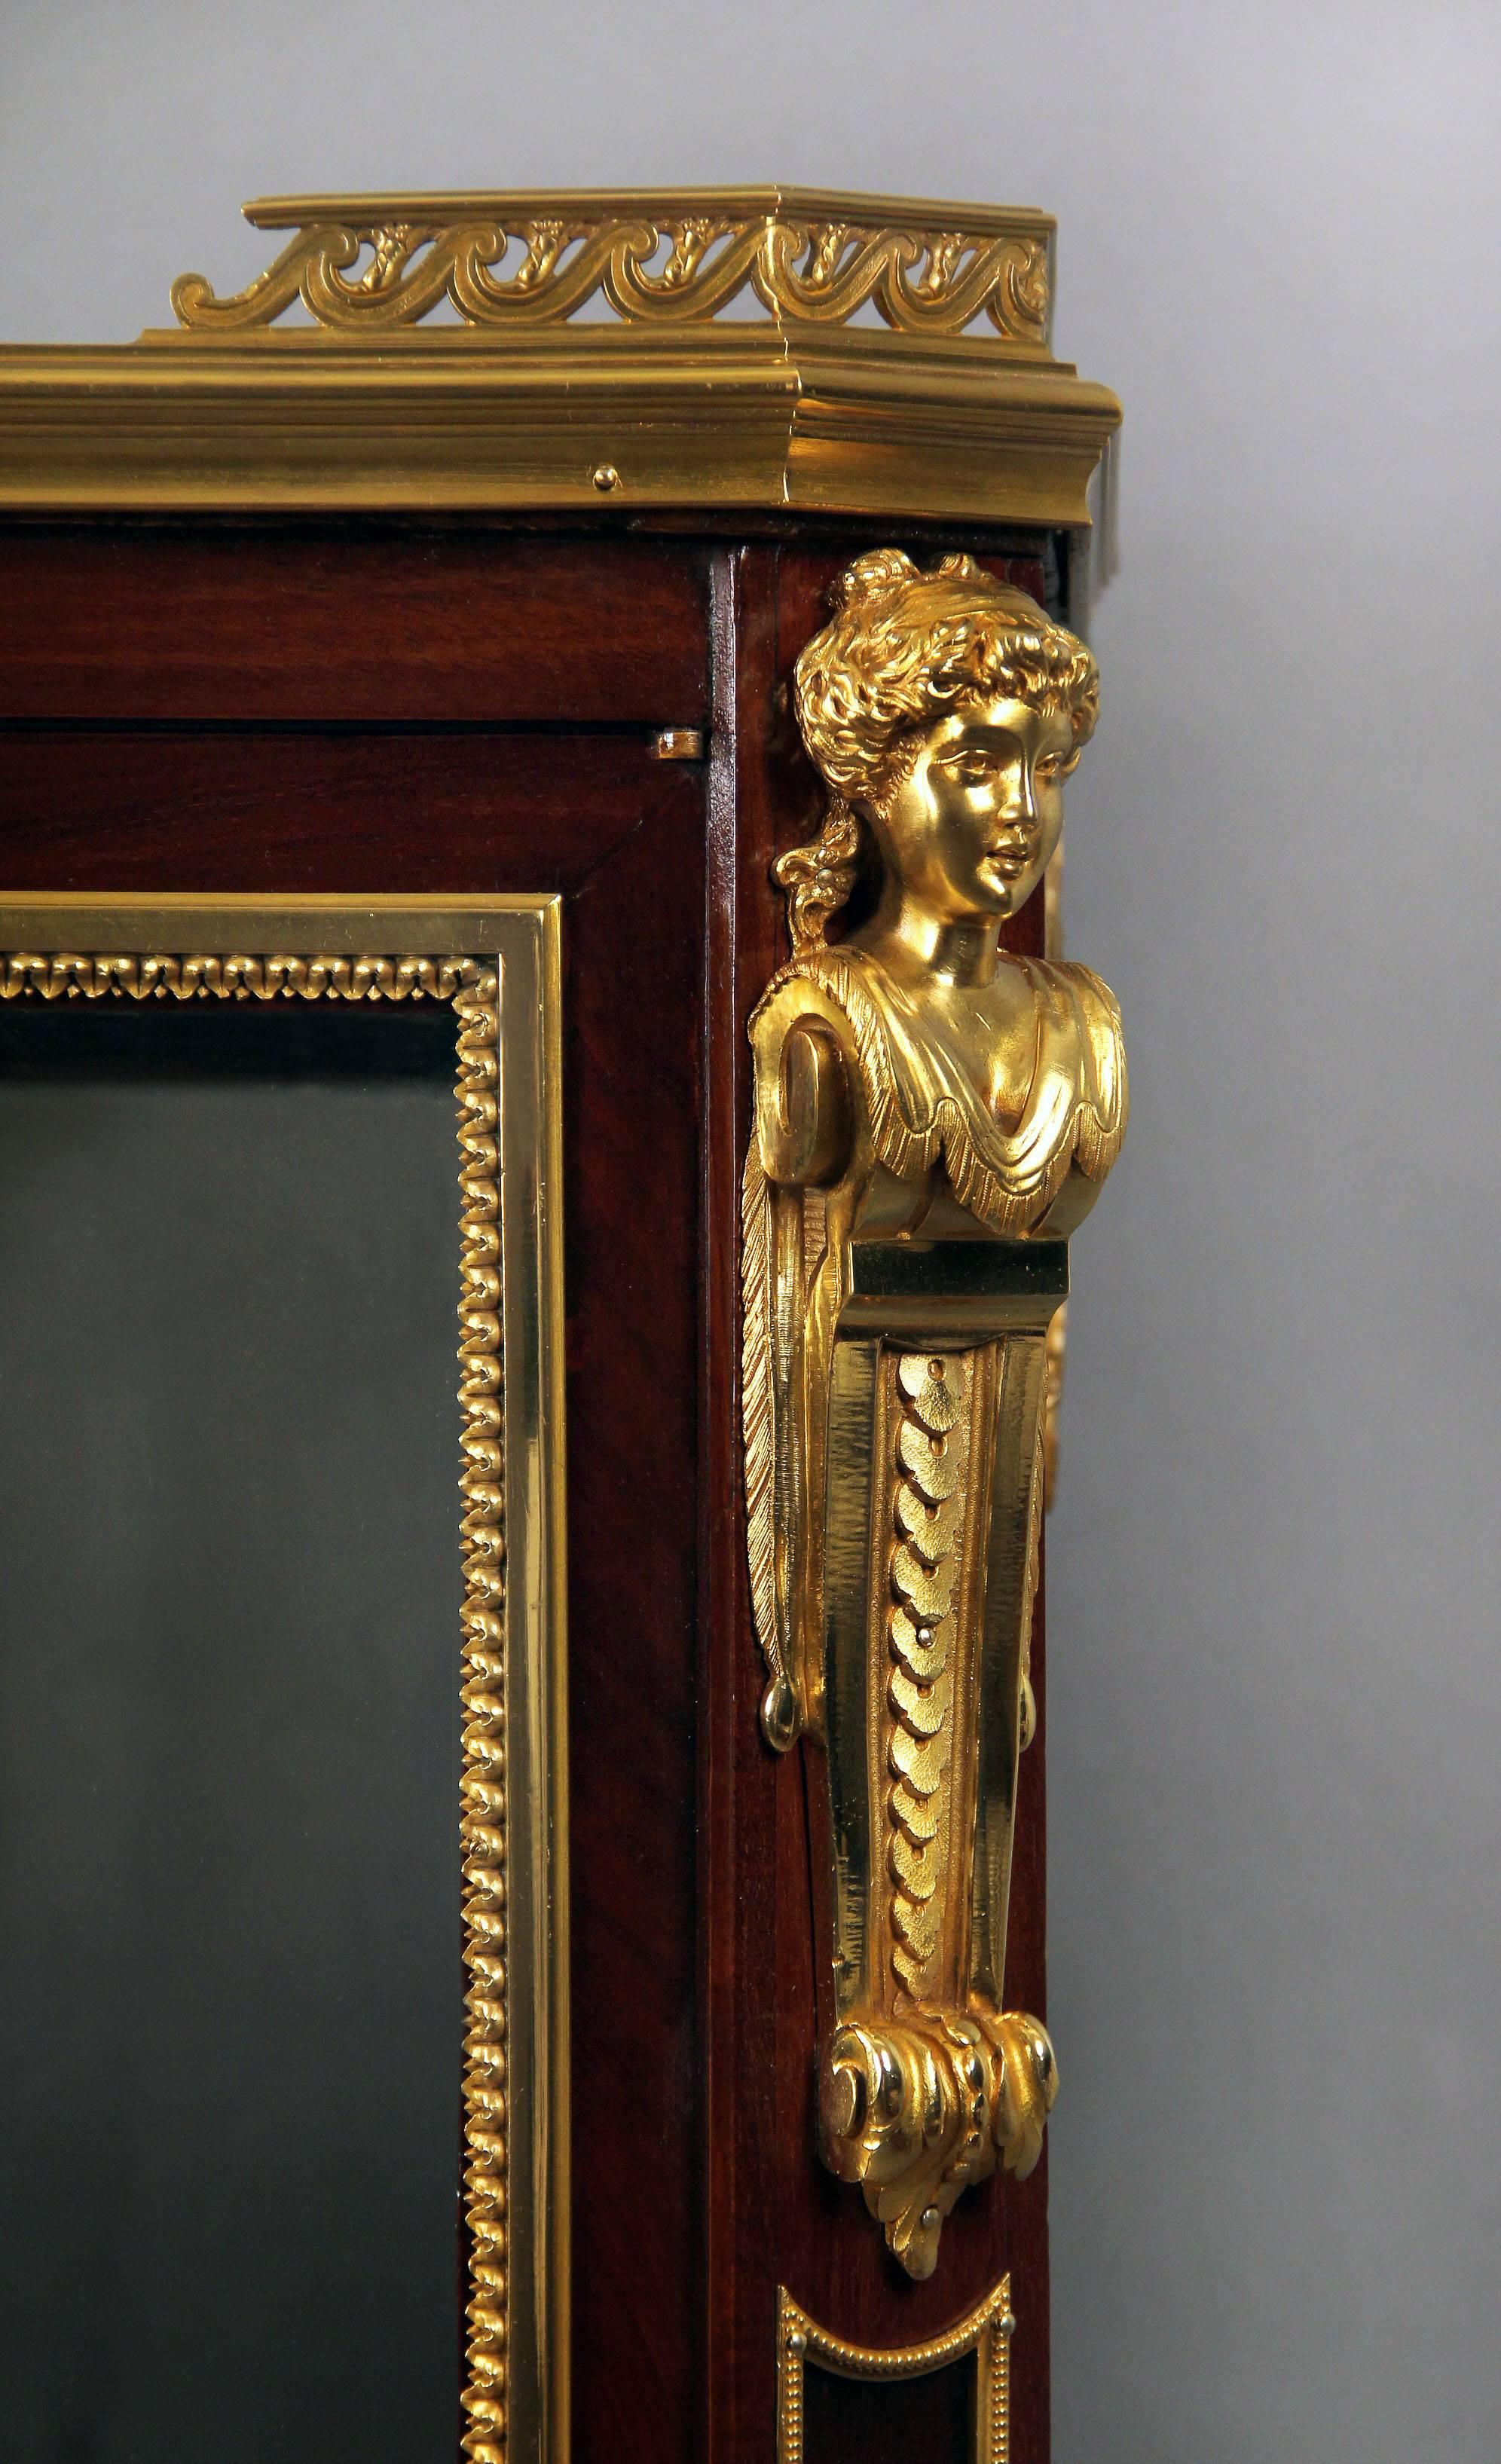 A fine late 19th century Louis XVI style gilt bronze-mounted double vitrine cabinet

By Henri Picard

The vitrine fitted with a nice inset marble top, the upper cabinet with a long single drawer and bronze women busts on the corners. The bottom